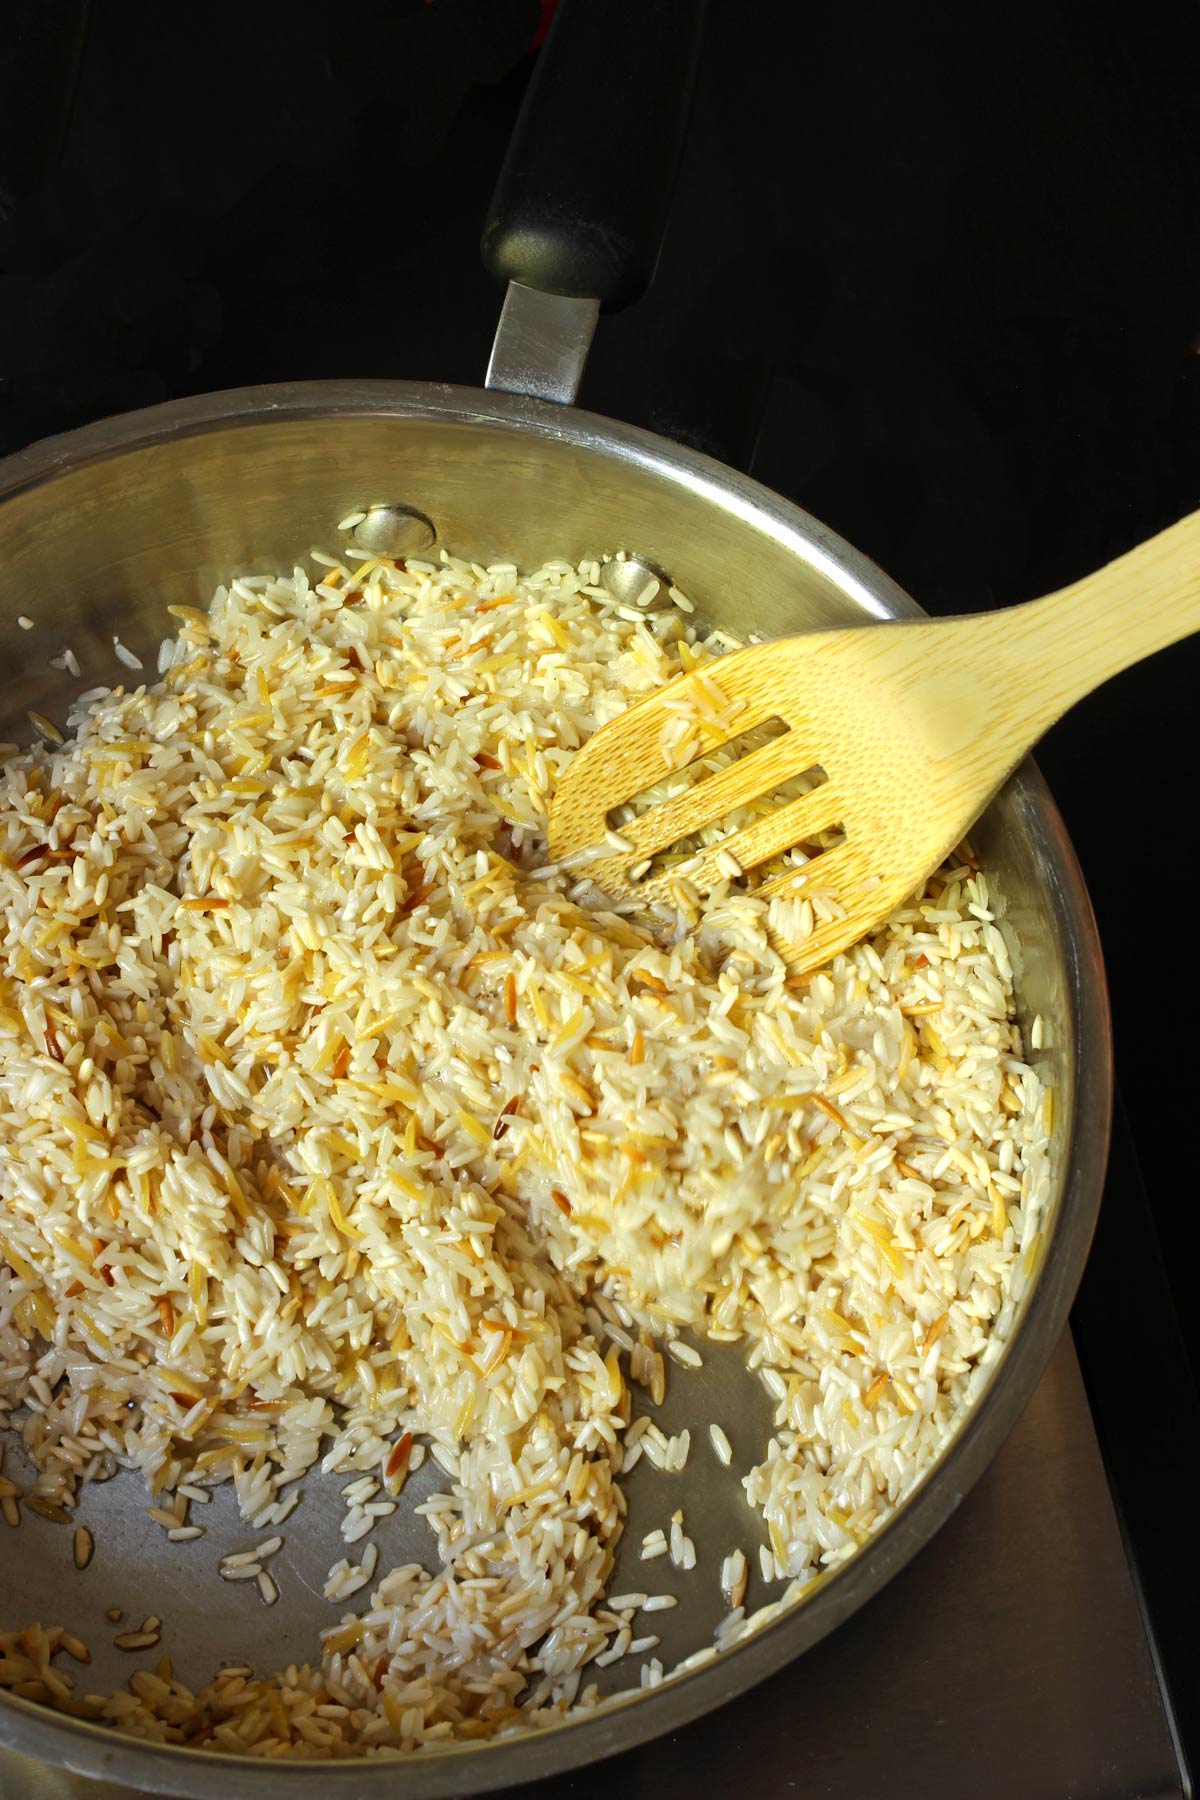 rice and orzo starting to brown in the pan.